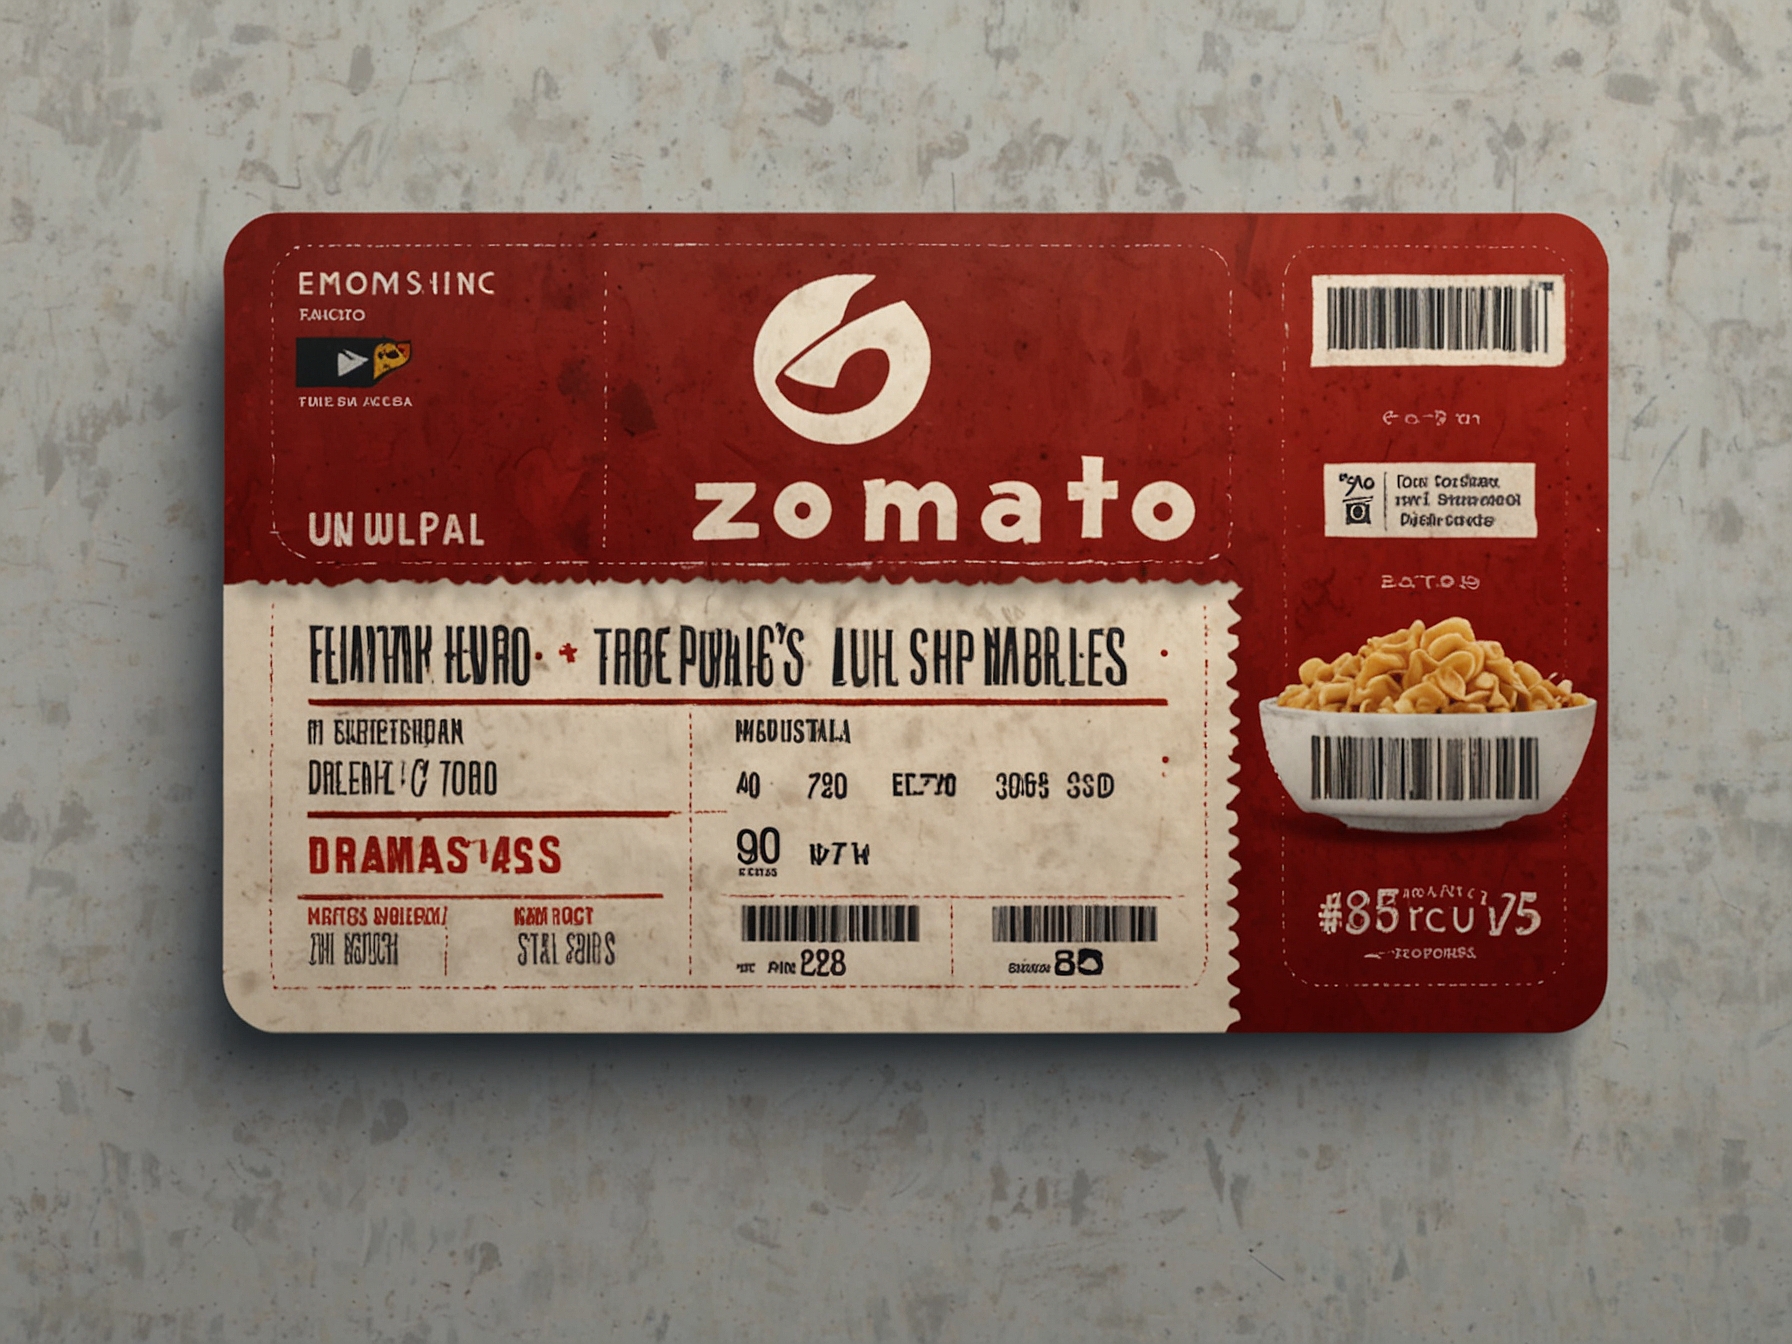 An illustrative image of a Zomato logo morphing into a movie ticket icon, symbolizing the potential acquisition of Paytm’s movies and ticketing business by Zomato.